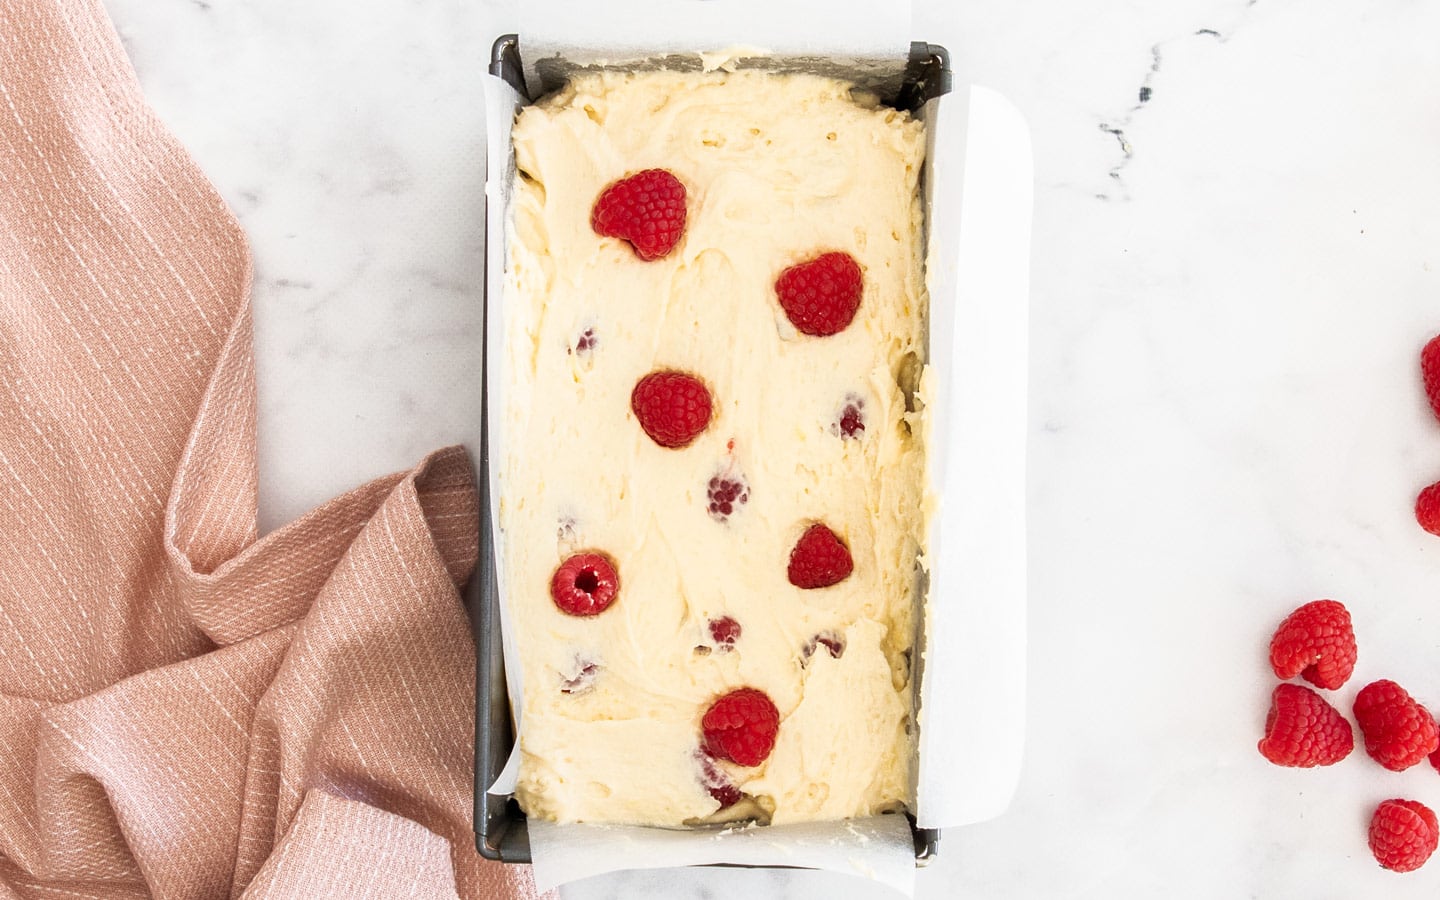 The batter in the loaf pan with some raspberries dotted on top.